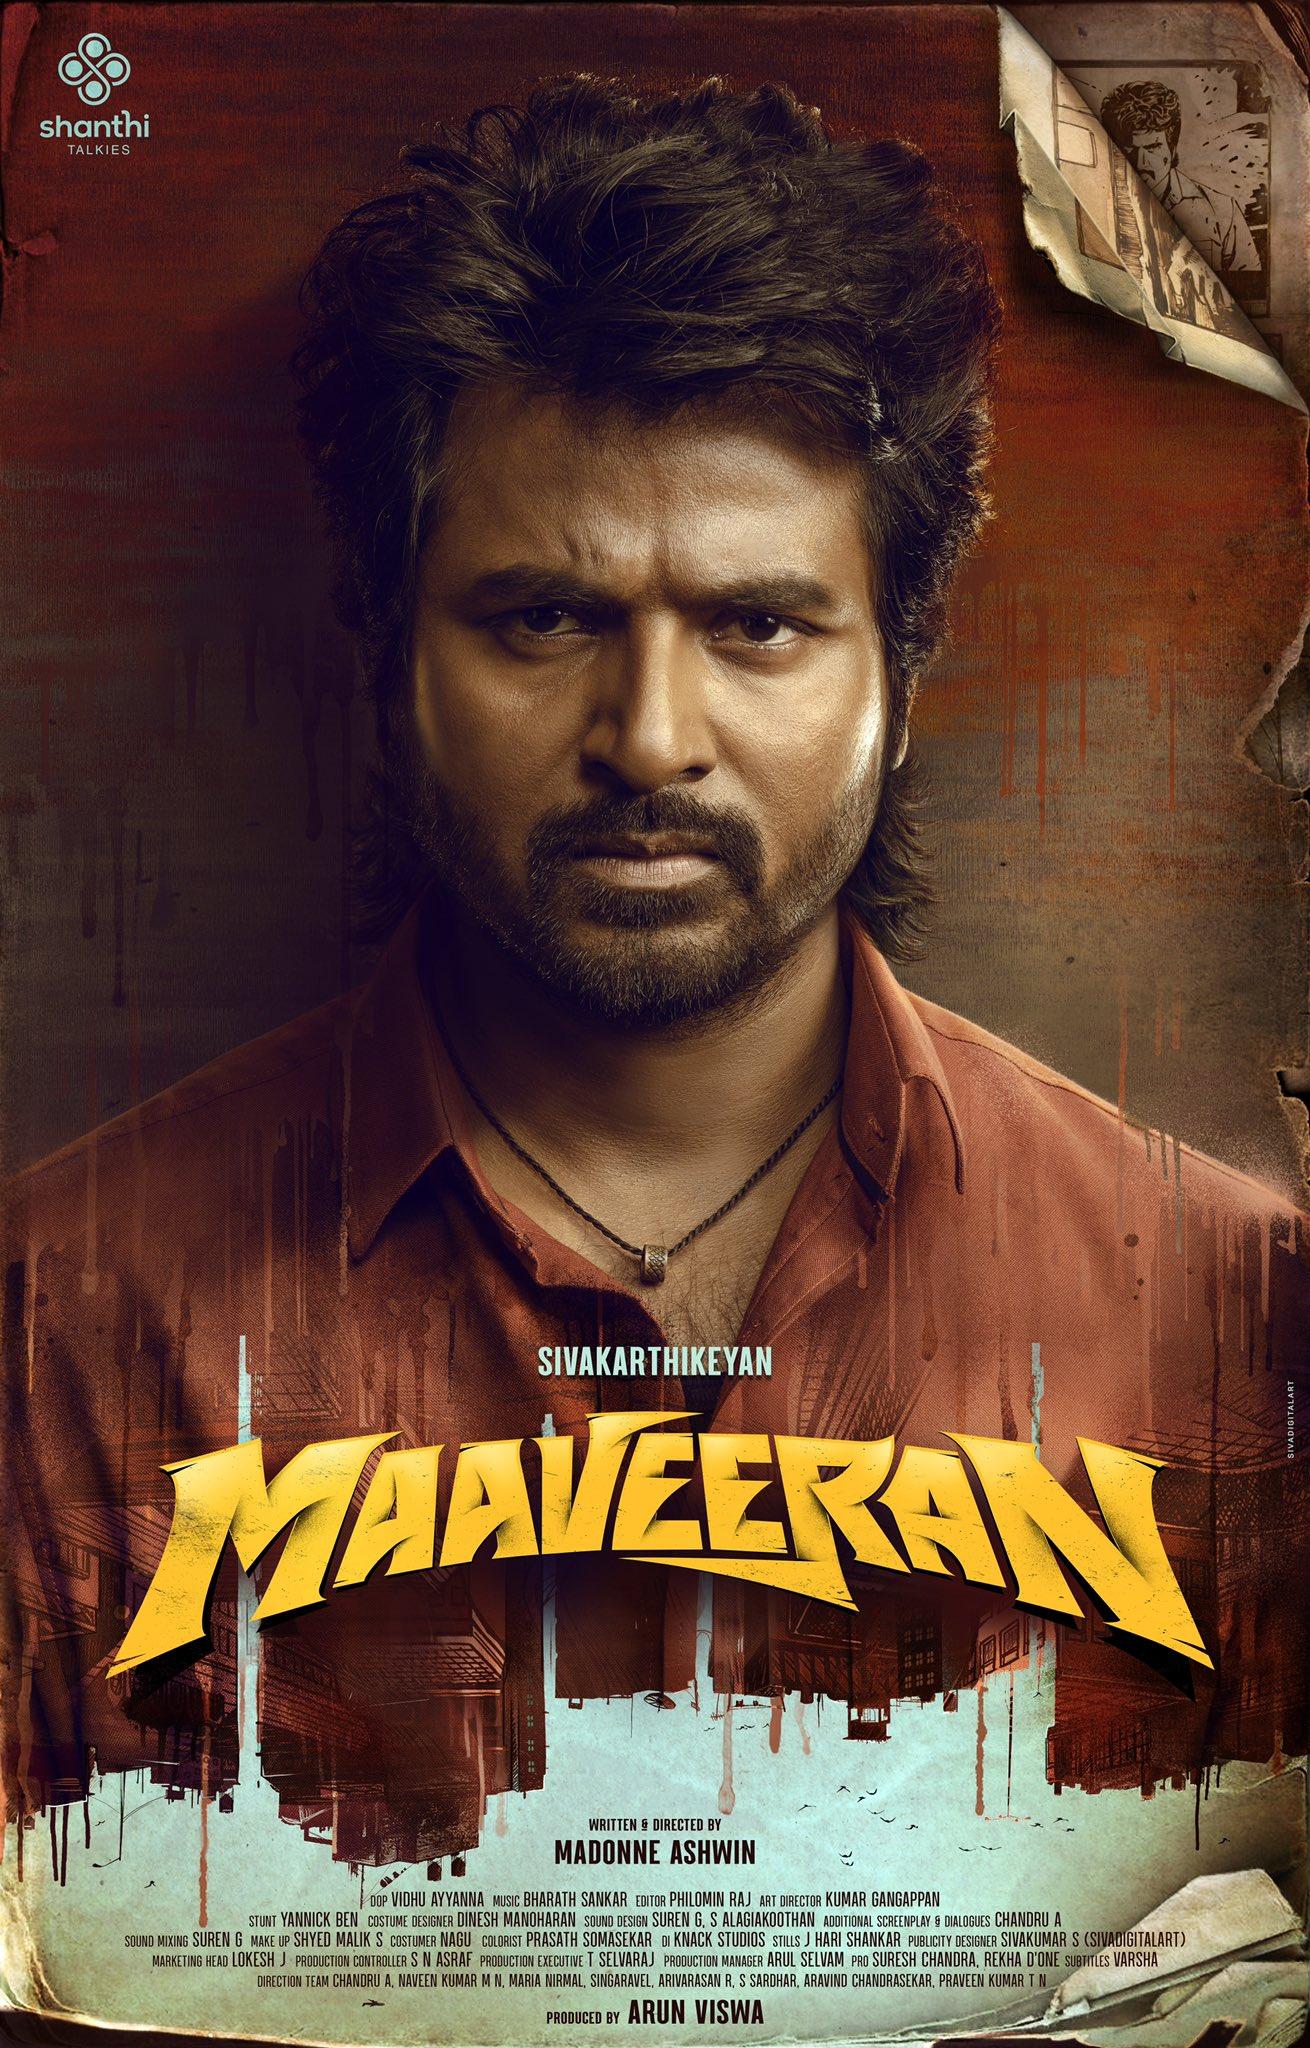 Maaveeran ( Prime Video): Maaveeran introduces us to a timid cartoonist whose life takes an unexpected turn. He starts hearing the voice of his comic strip character, Maaveeran, a fearless warrior.